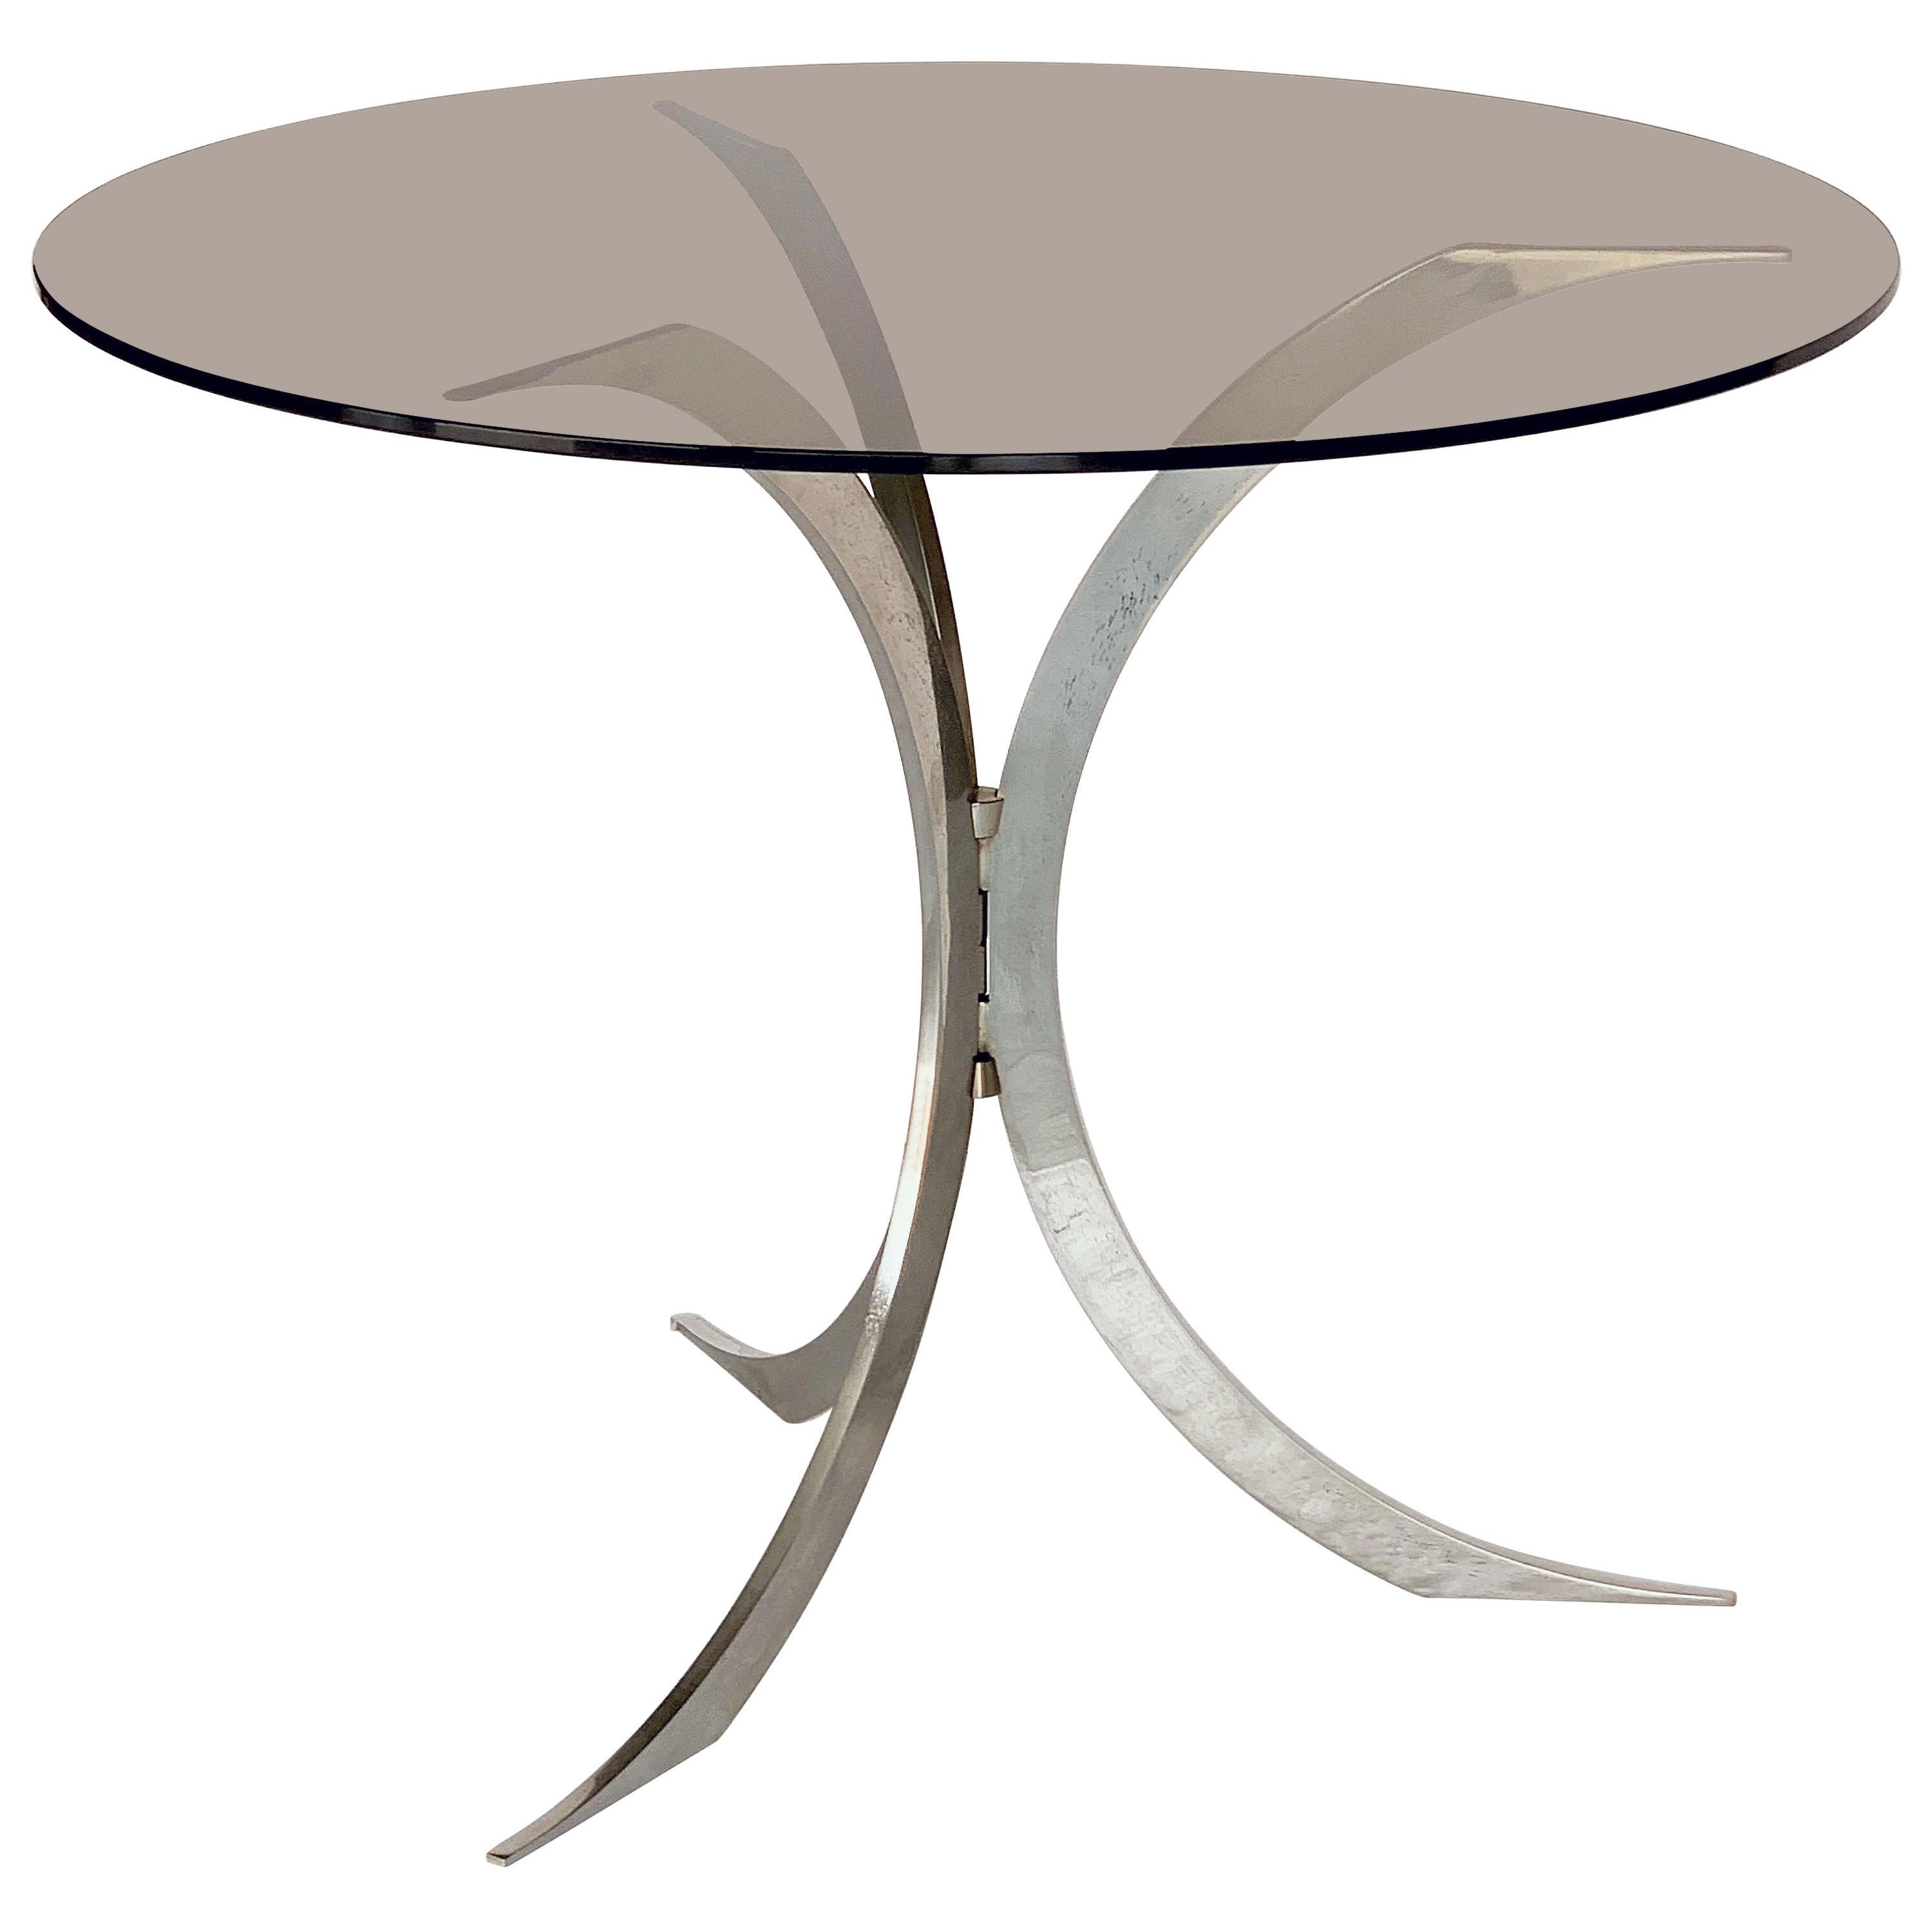 Round Occasional Table of Chrome Metal with Smoked Glass Top from England